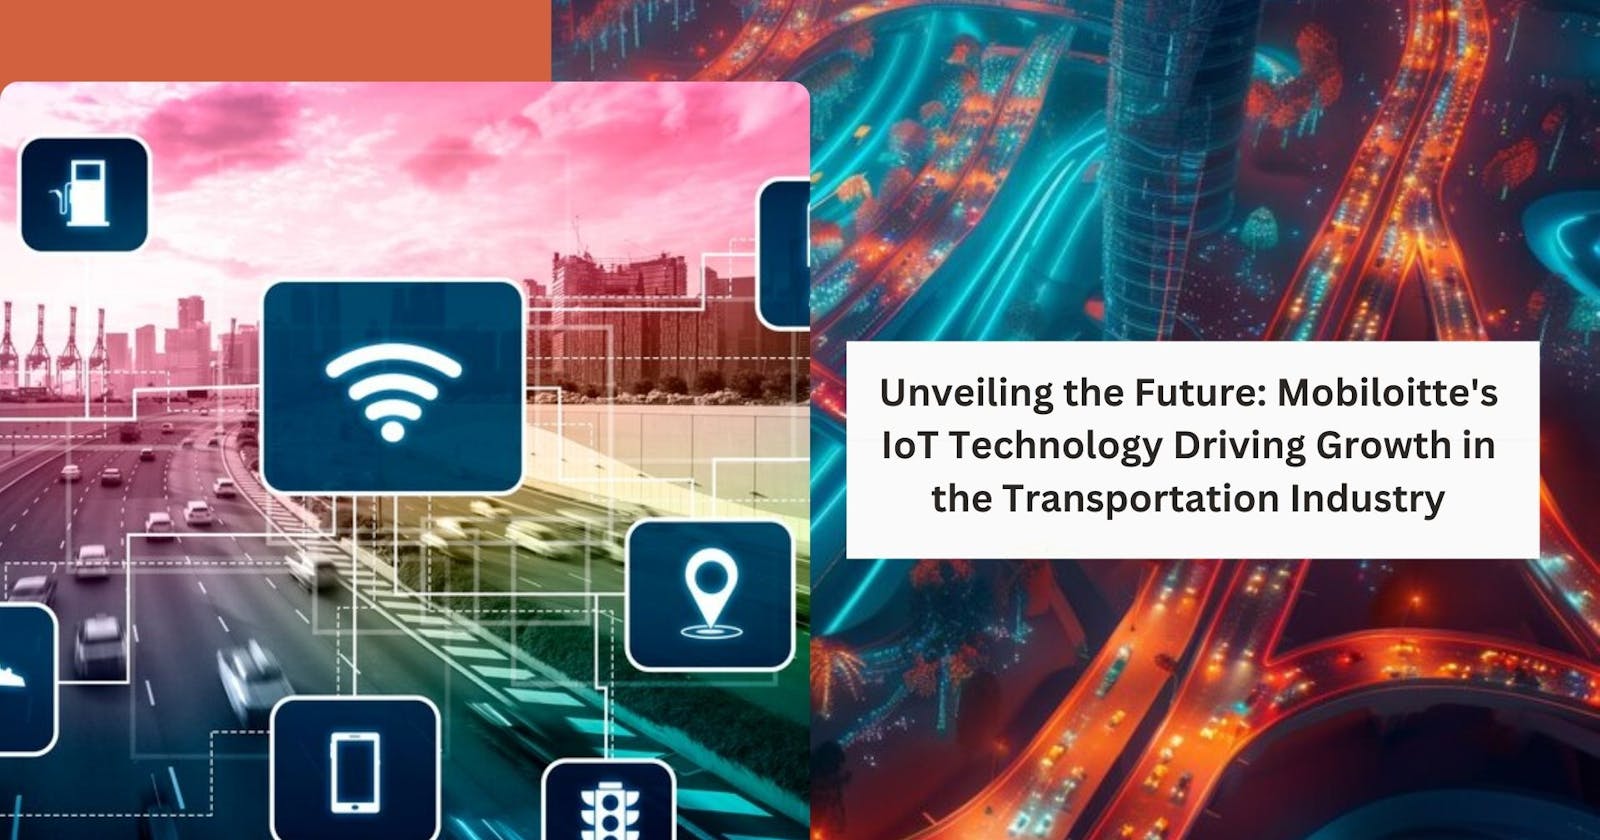 Unveiling the Future: Mobiloitte's IoT Technology Driving Growth in the Transportation Industry